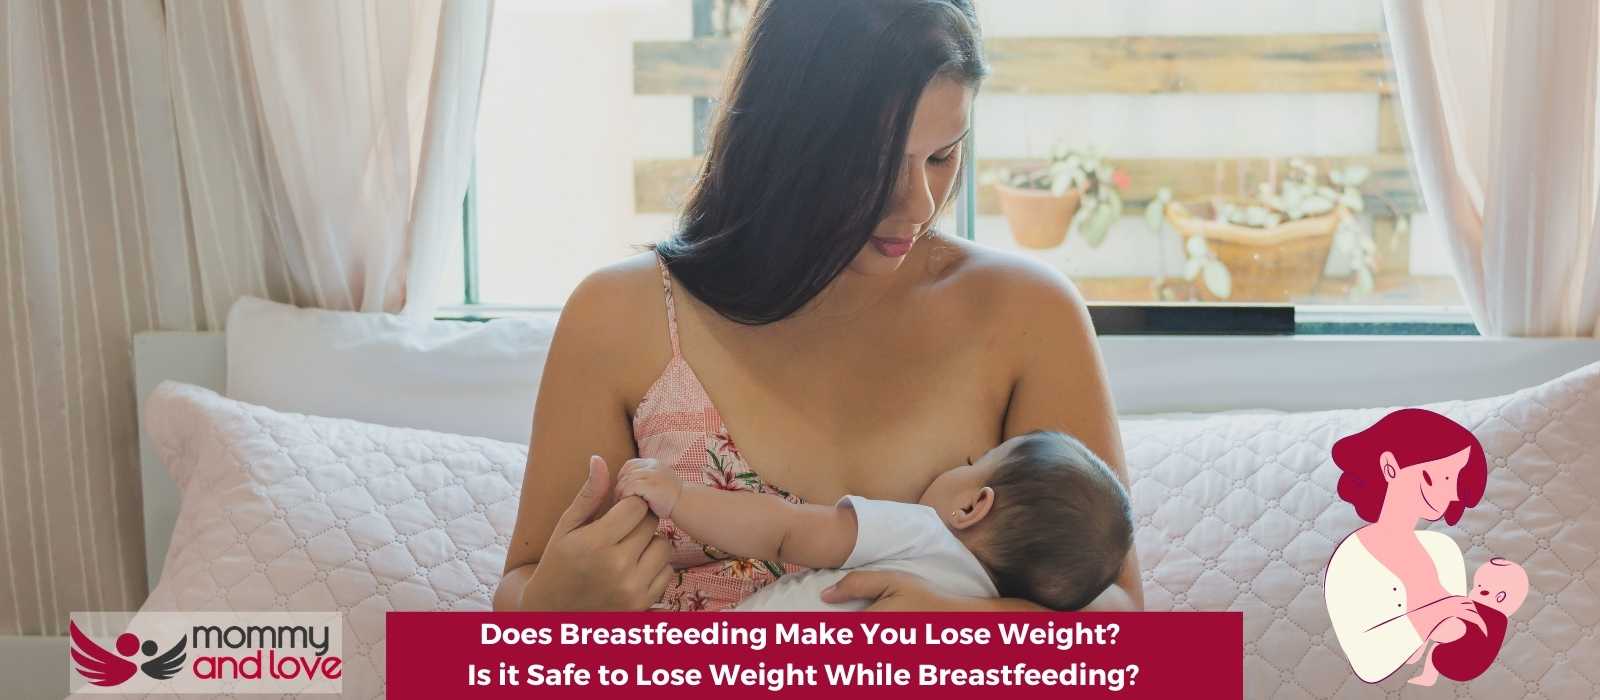 Does Breastfeeding Make You Lose Weight Is it Safe to Lose Weight While Breastfeeding